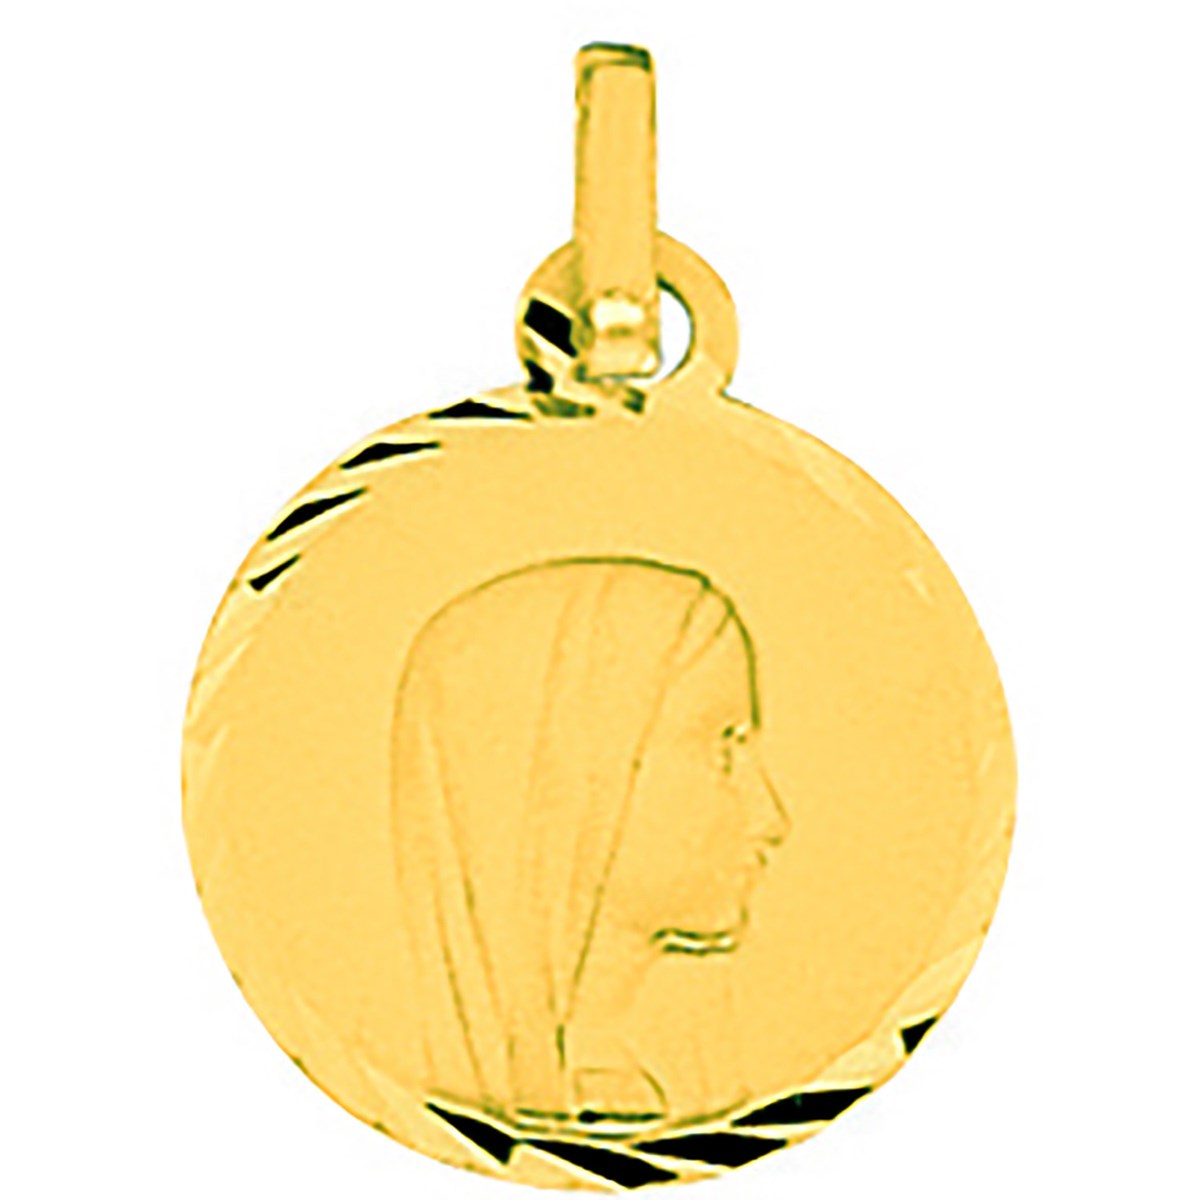 Médaille ronde Brillaxis vierge or 18 carats